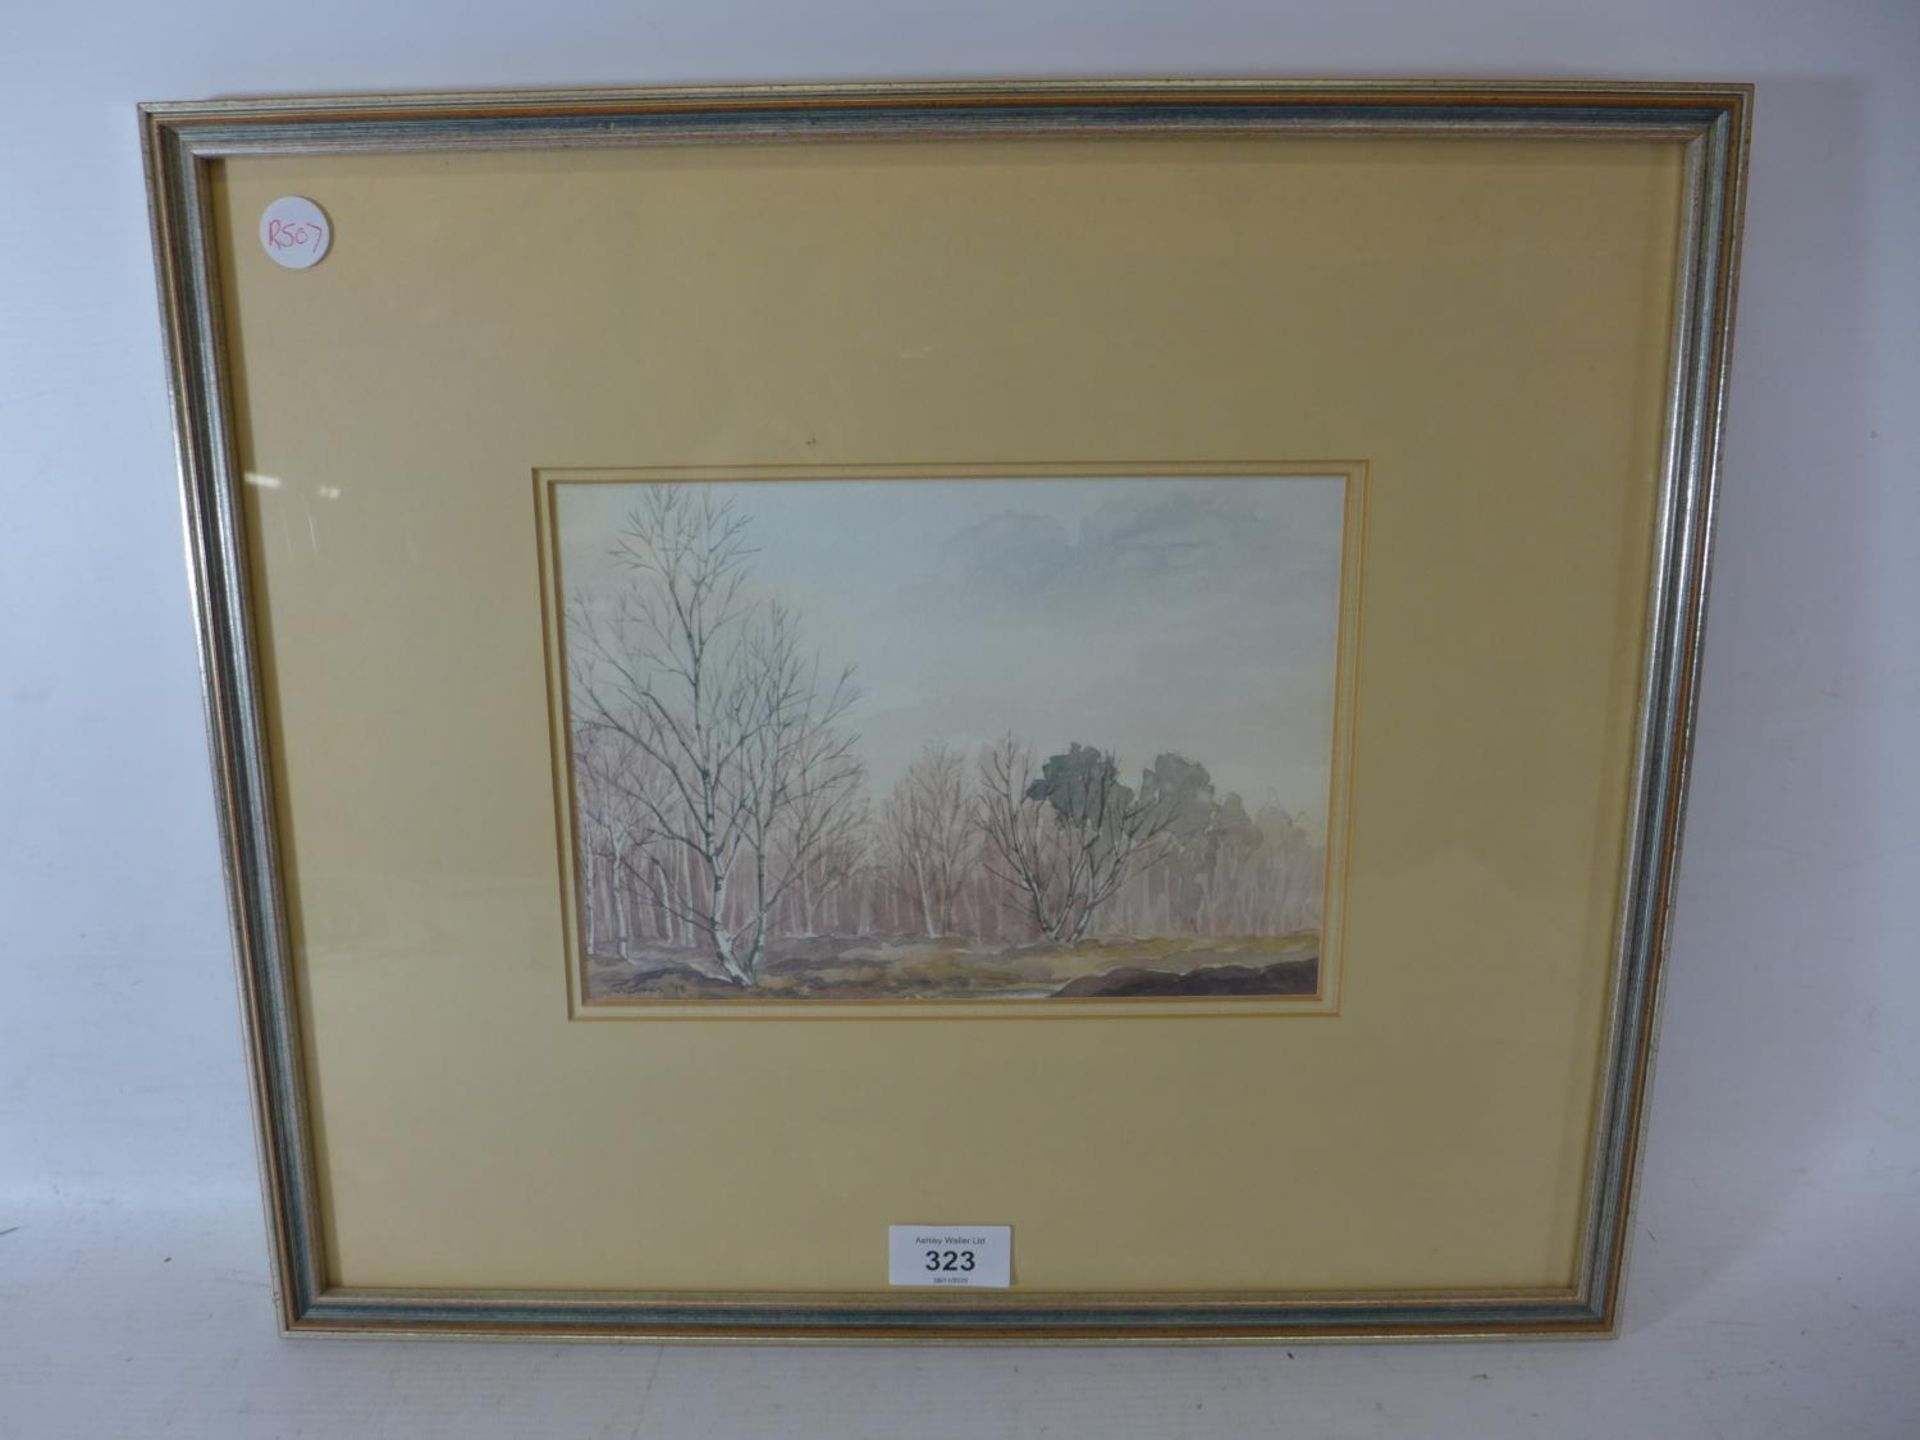 JULIET JONES (BRITISH 20TH/21ST CENTURY) 'LINDOW COMMON', WATERCOLOUR, SIGNED AND DATED 88, 15 X